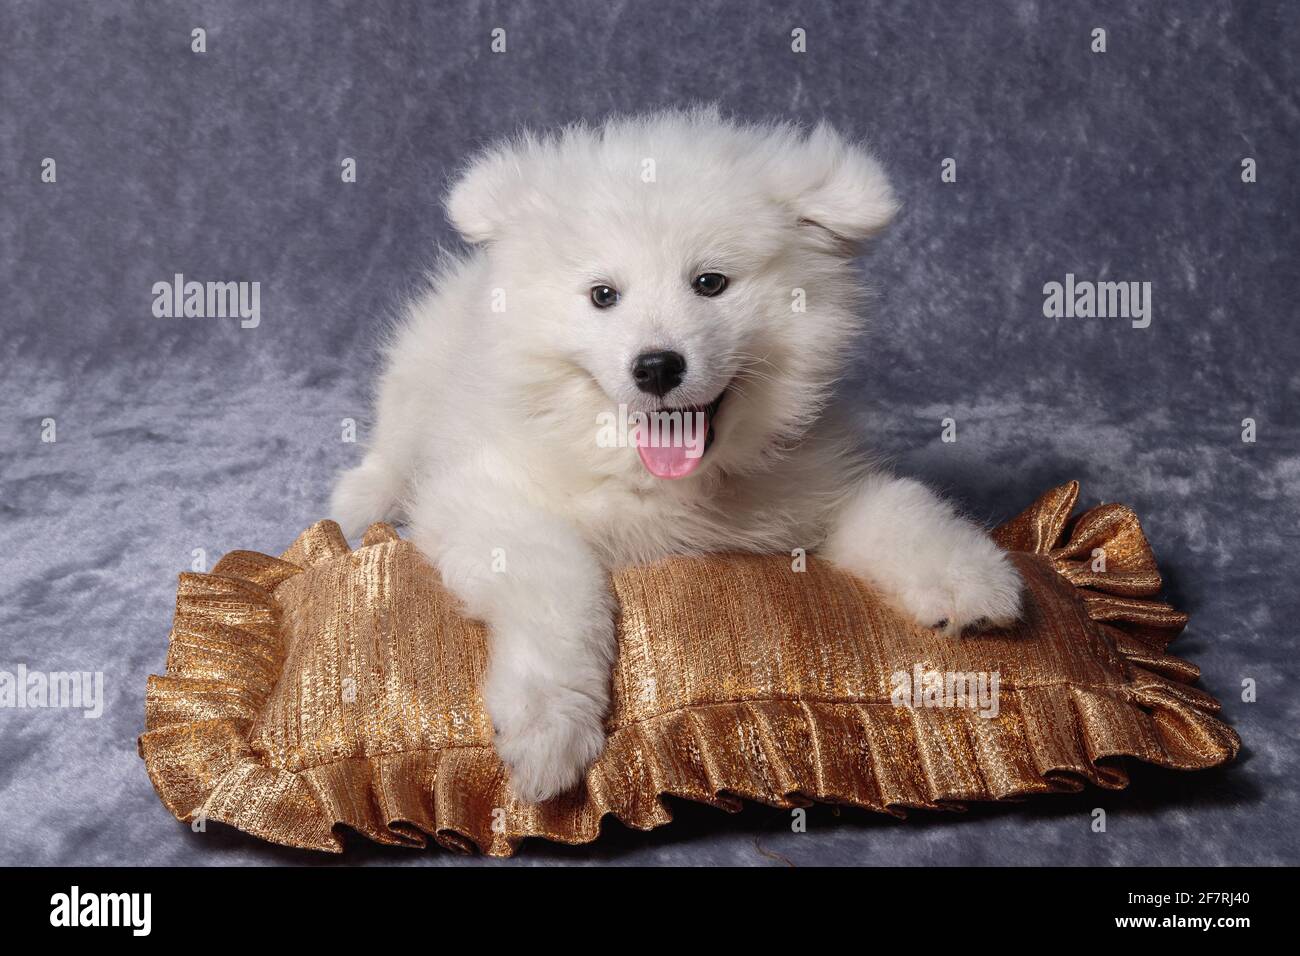 Little samoyed puppy resting on a golden pillow Stock Photo